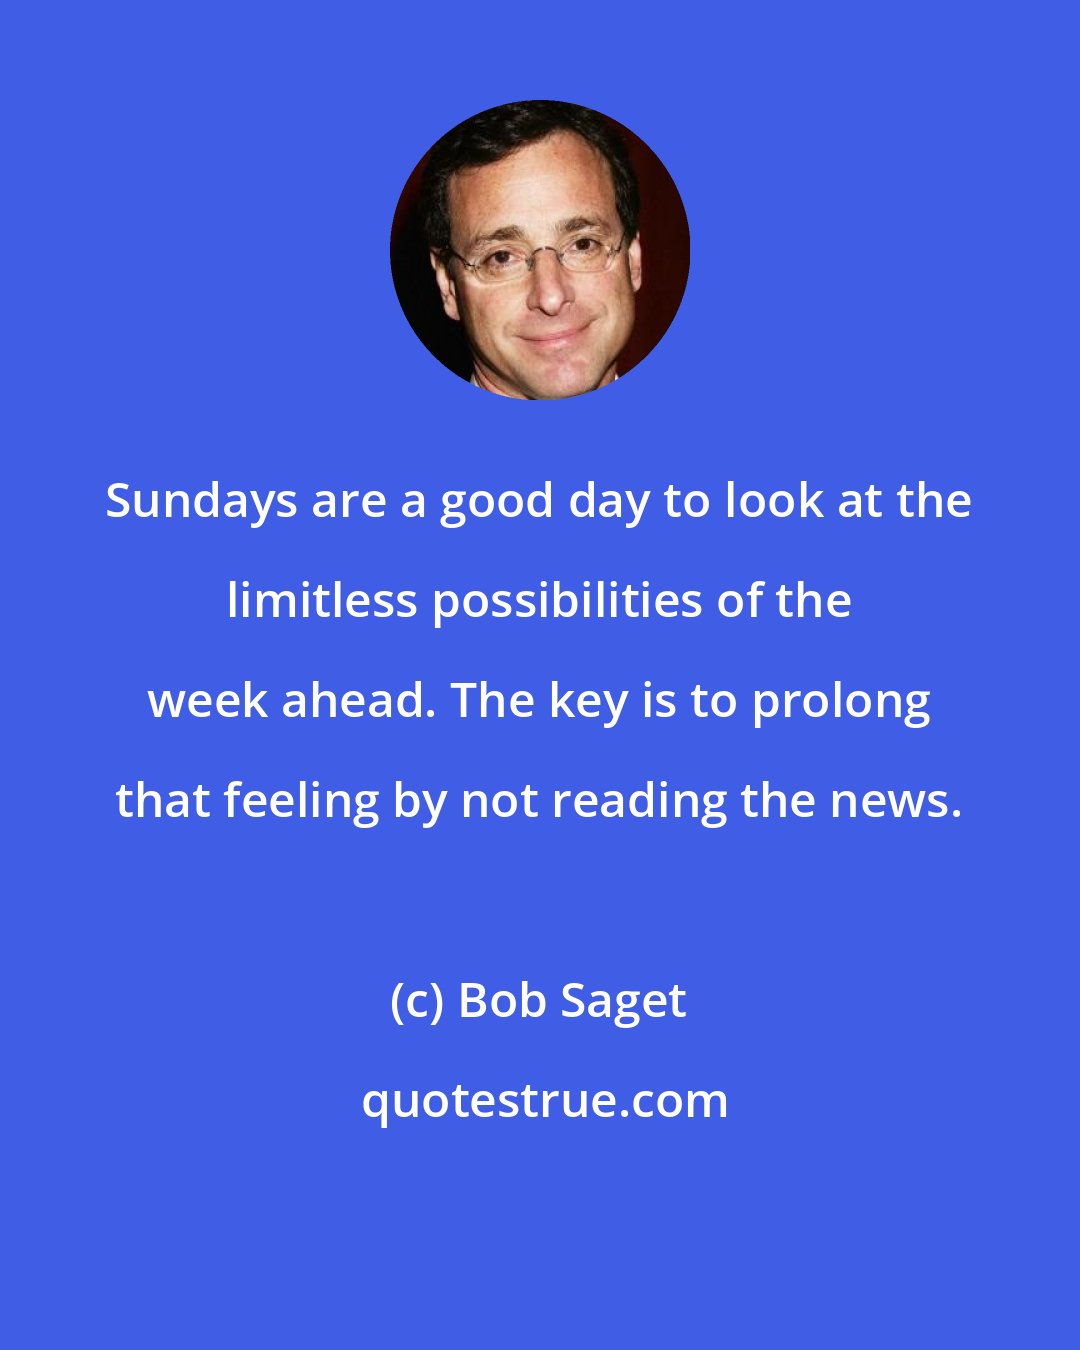 Bob Saget: Sundays are a good day to look at the limitless possibilities of the week ahead. The key is to prolong that feeling by not reading the news.